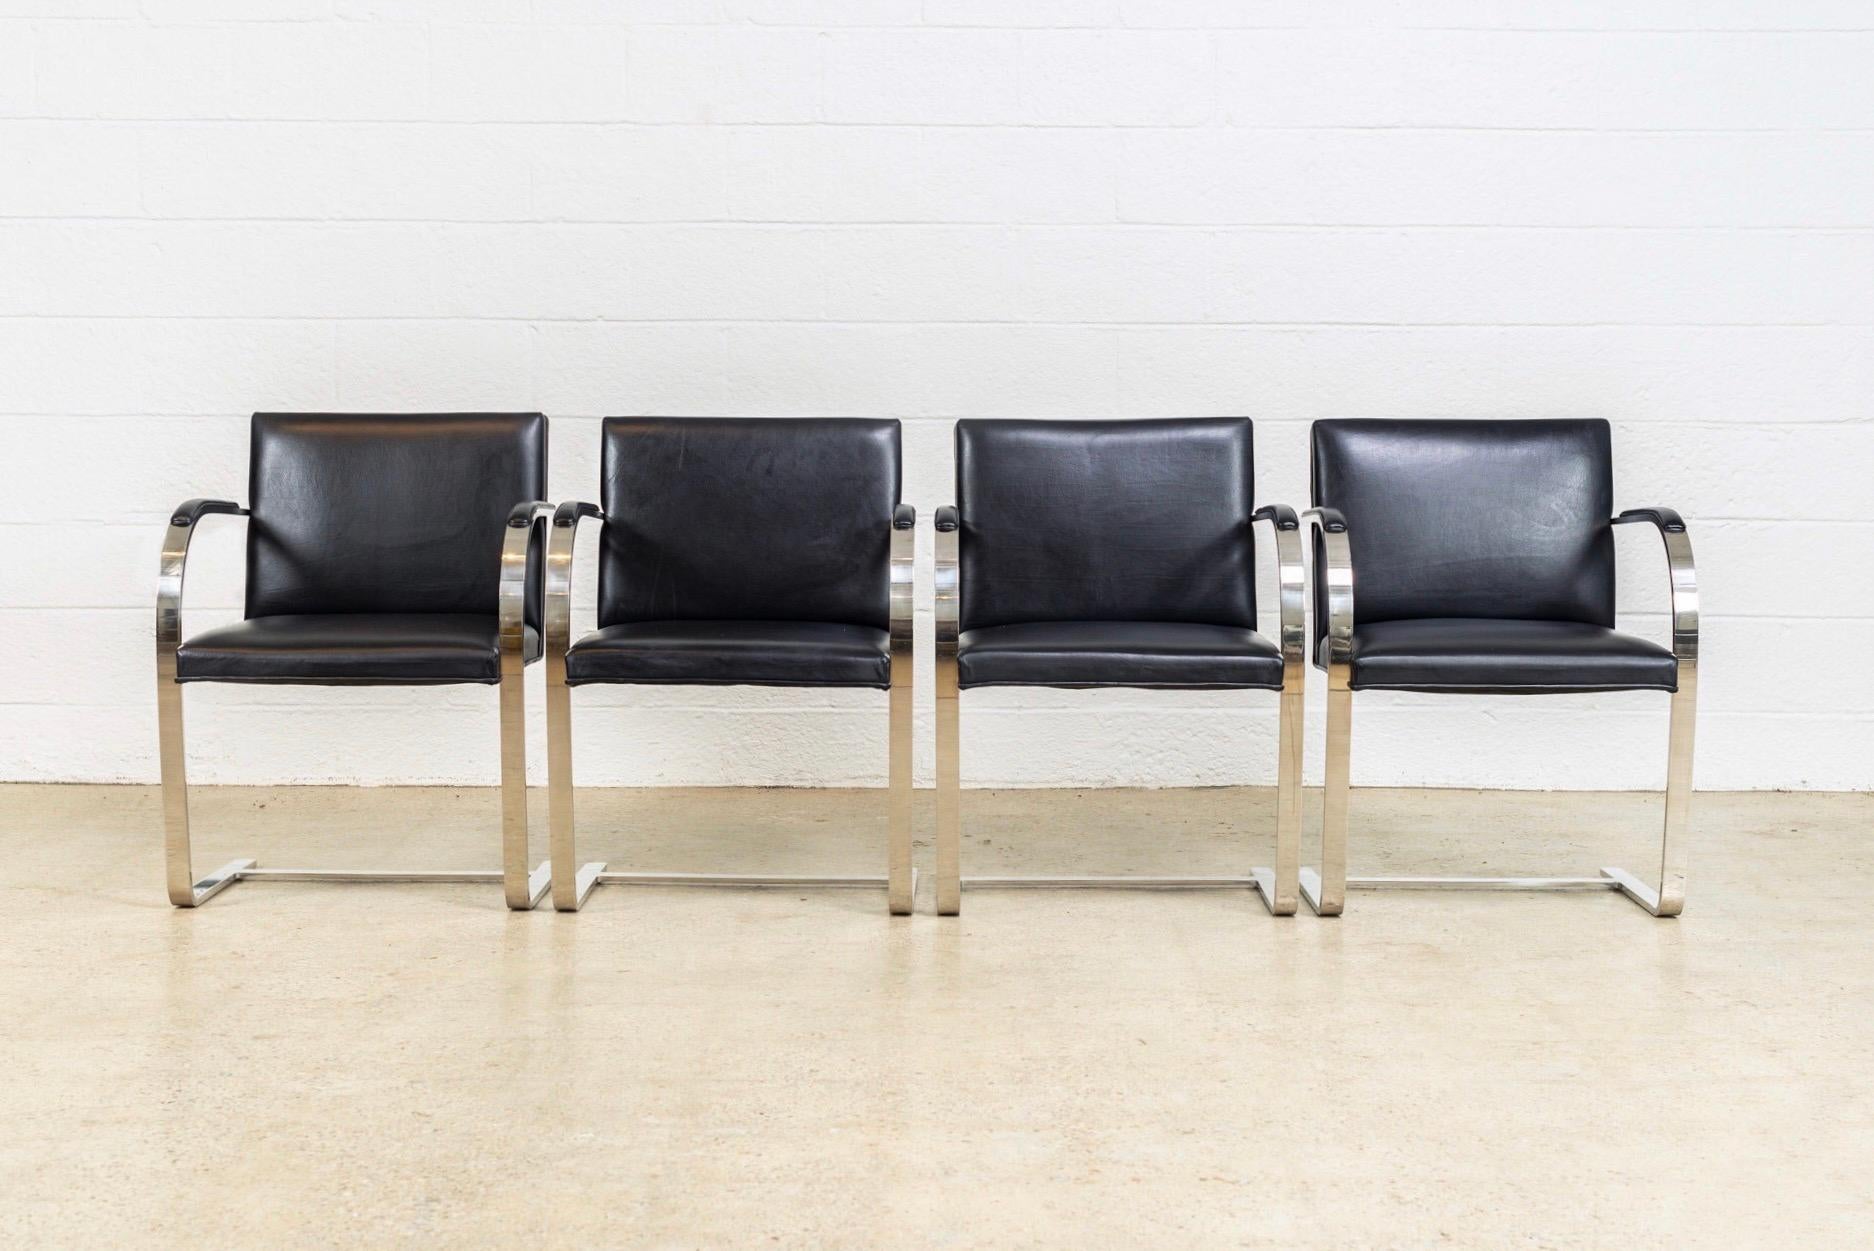 This set of four Ludwig Mies van der Rohe Brno flat bar armchairs manufactured by Knoll are, circa 1990. These iconic midcentury chairs designed by Mies van der Rohe in 1930 feature clean lines and a simple profile. This set features a steel frame